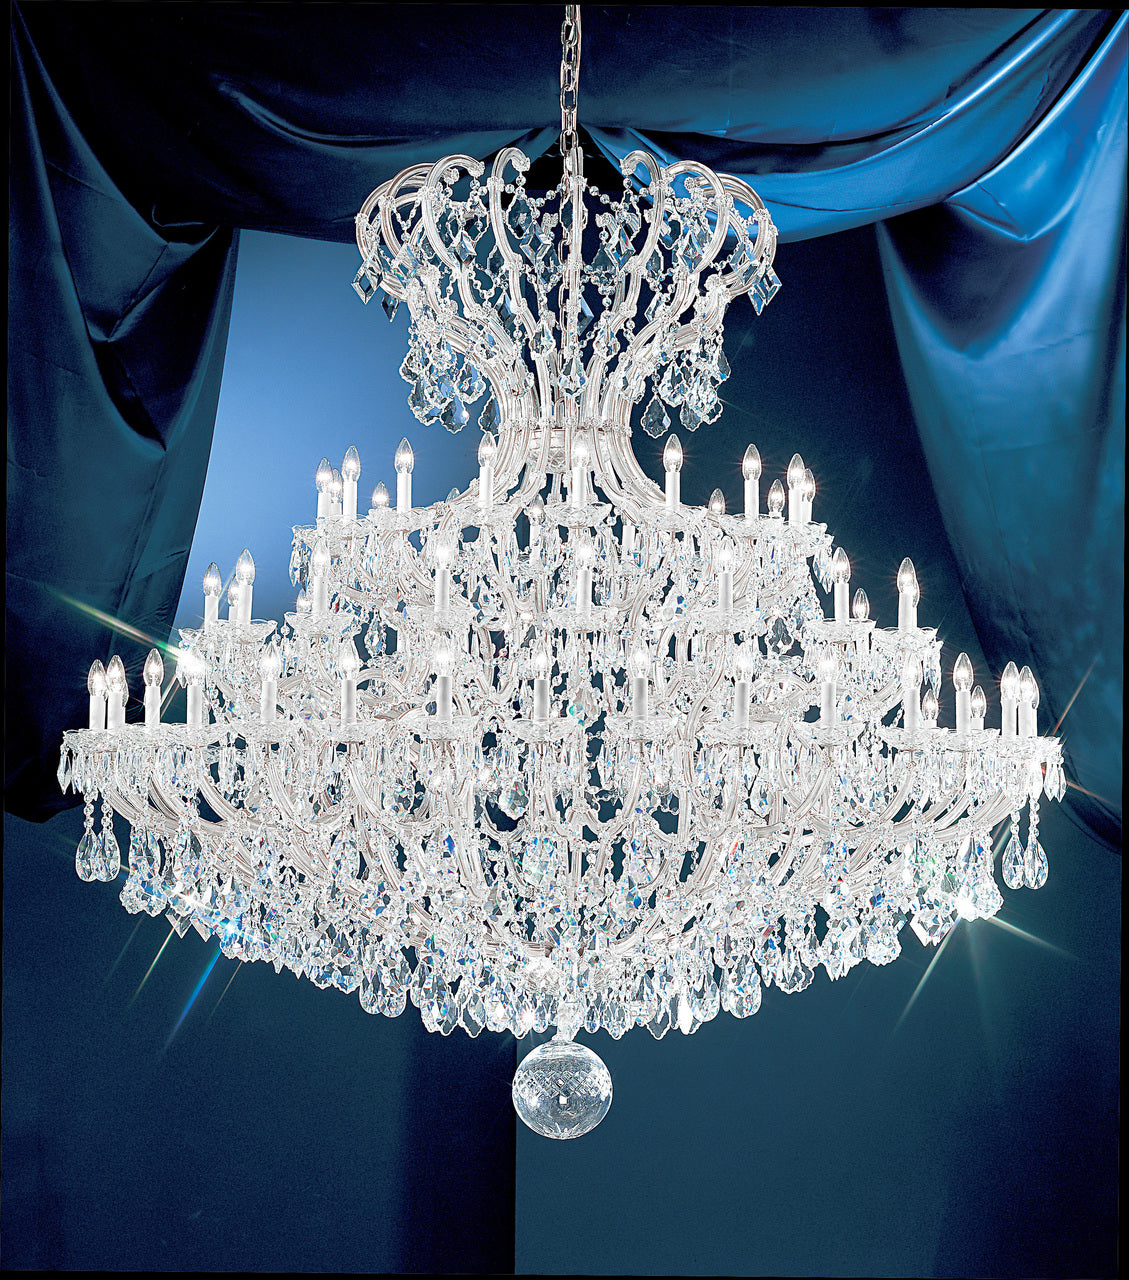 Classic Lighting 8149 CH C Maria Theresa Traditional Crystal Chandelier in Chrome (Imported from Italy)